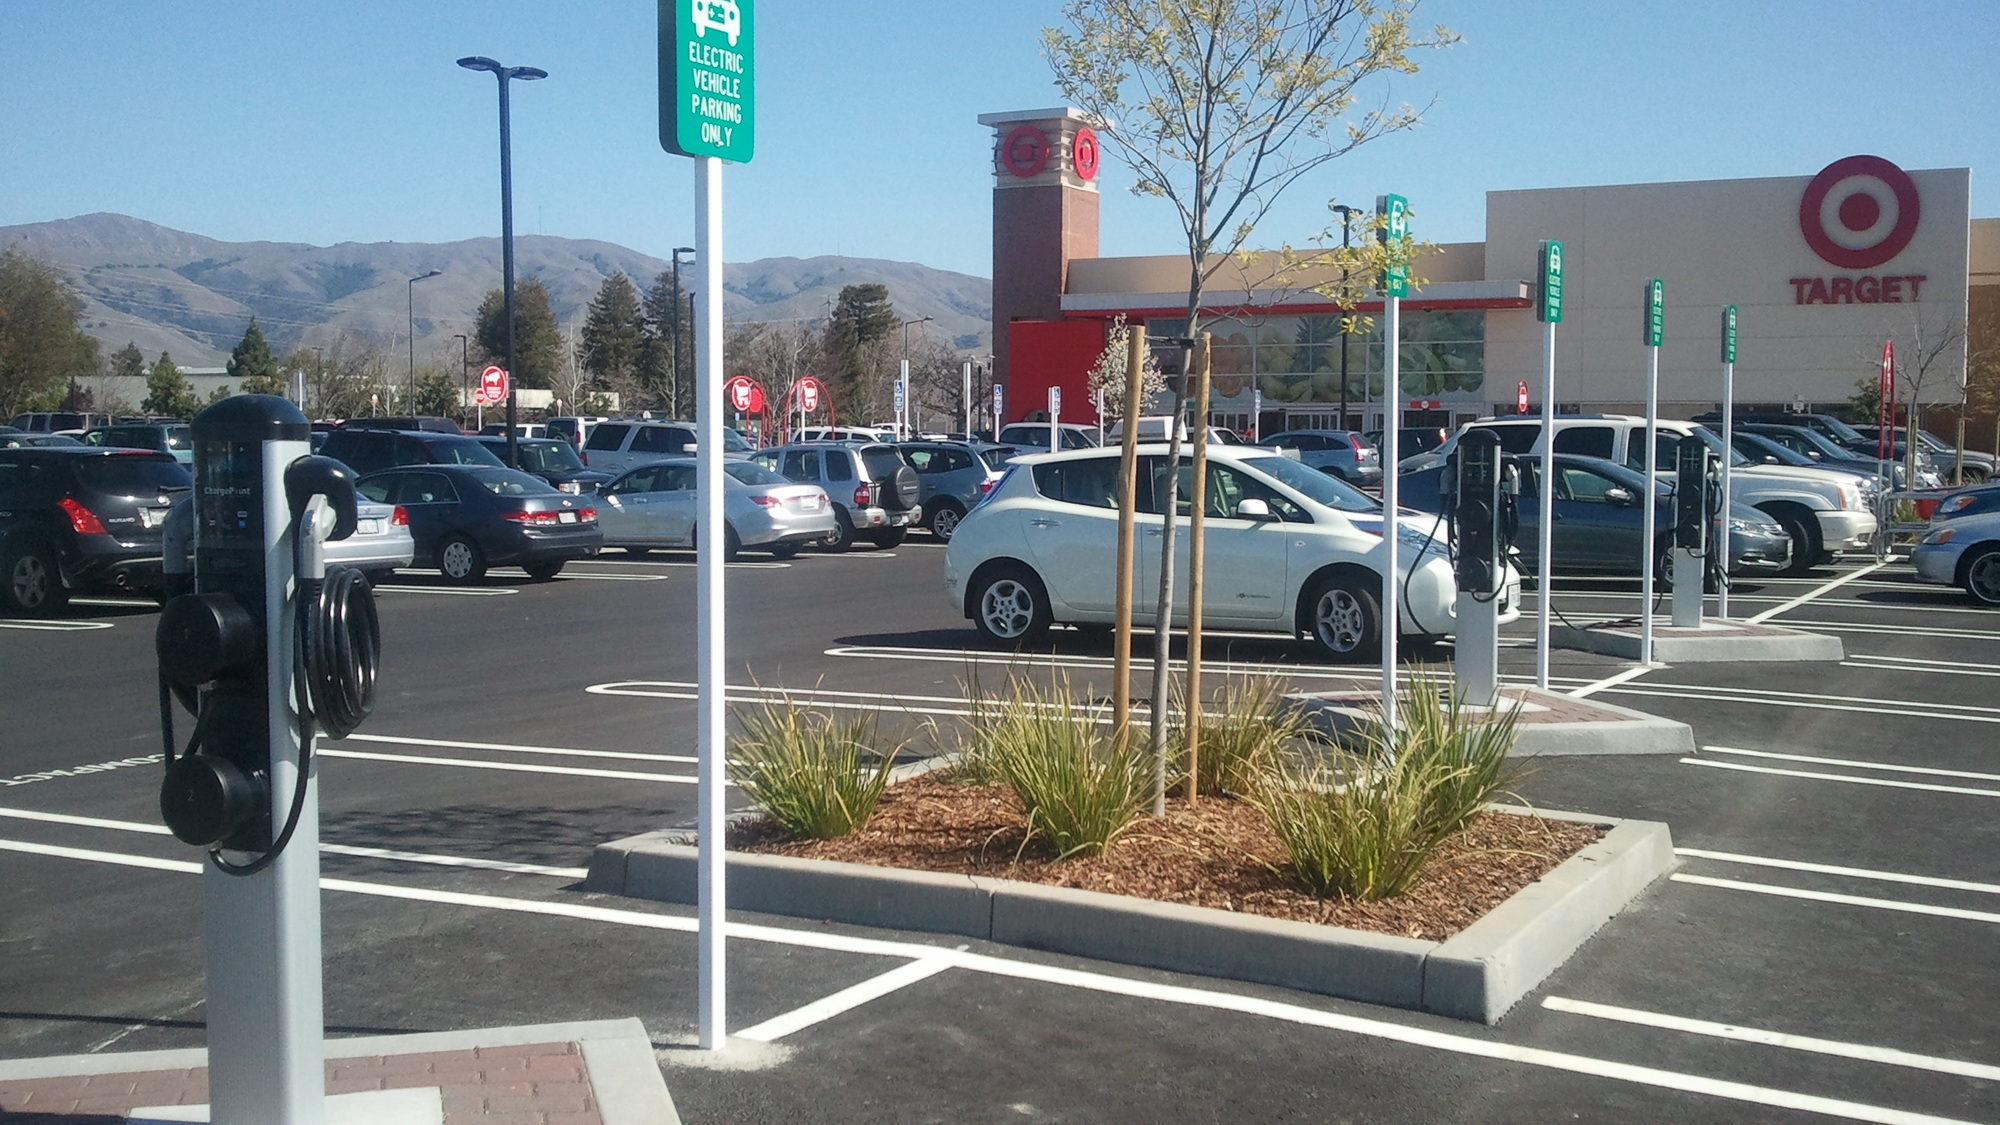 Electric-car charging stations at Target in Fremont, CA [photo by Wilson F. via ChargePoint Network]